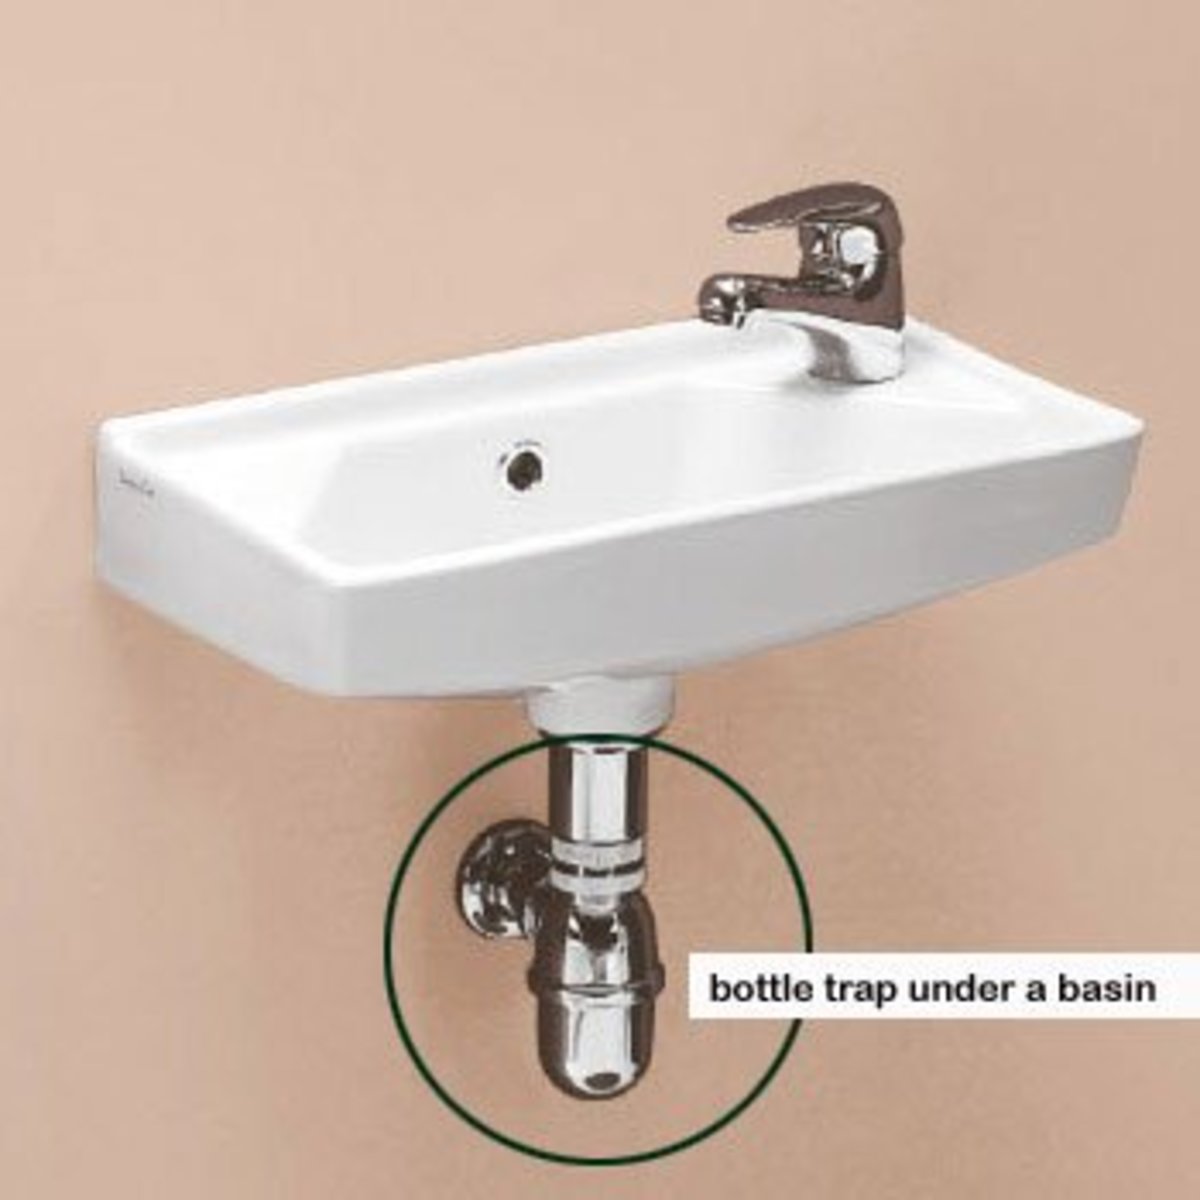 Why Do We Need Bottle Traps For Wash Basins Dengarden